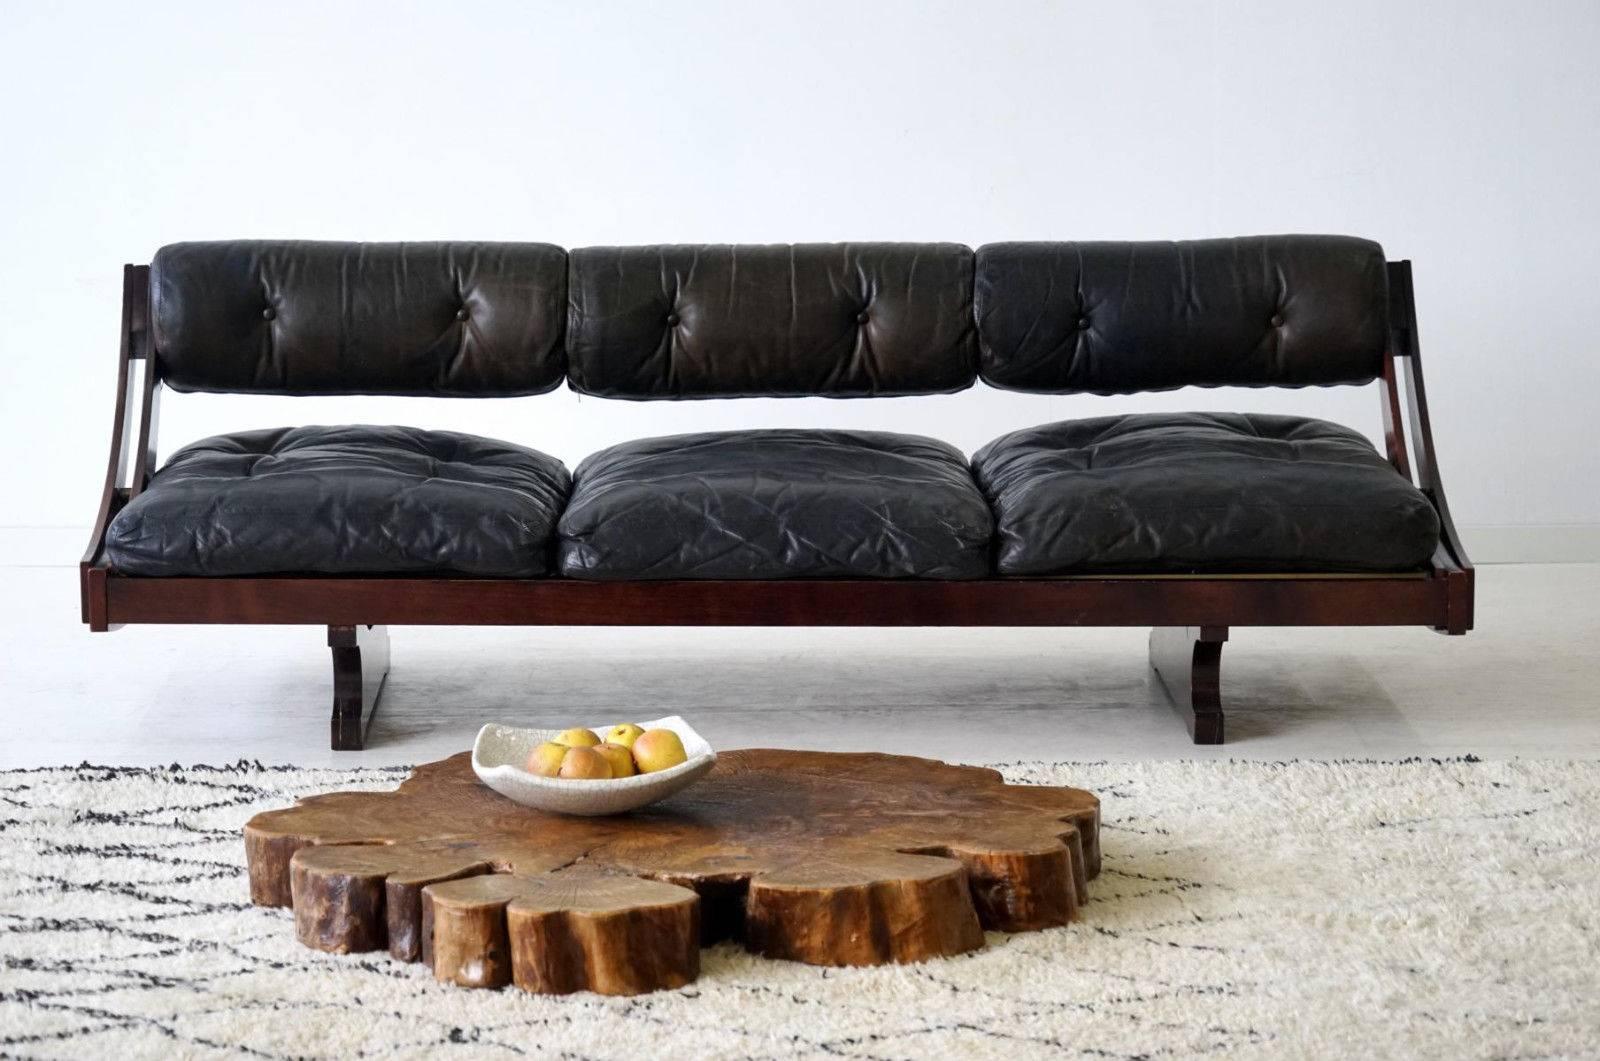 This three-seat daybed was designed by Gianni Songia for Sormani, Italy, in 1963.
Model GS-195 with black leather cushions.
The backrest can be adapted to make it a daybed.
 